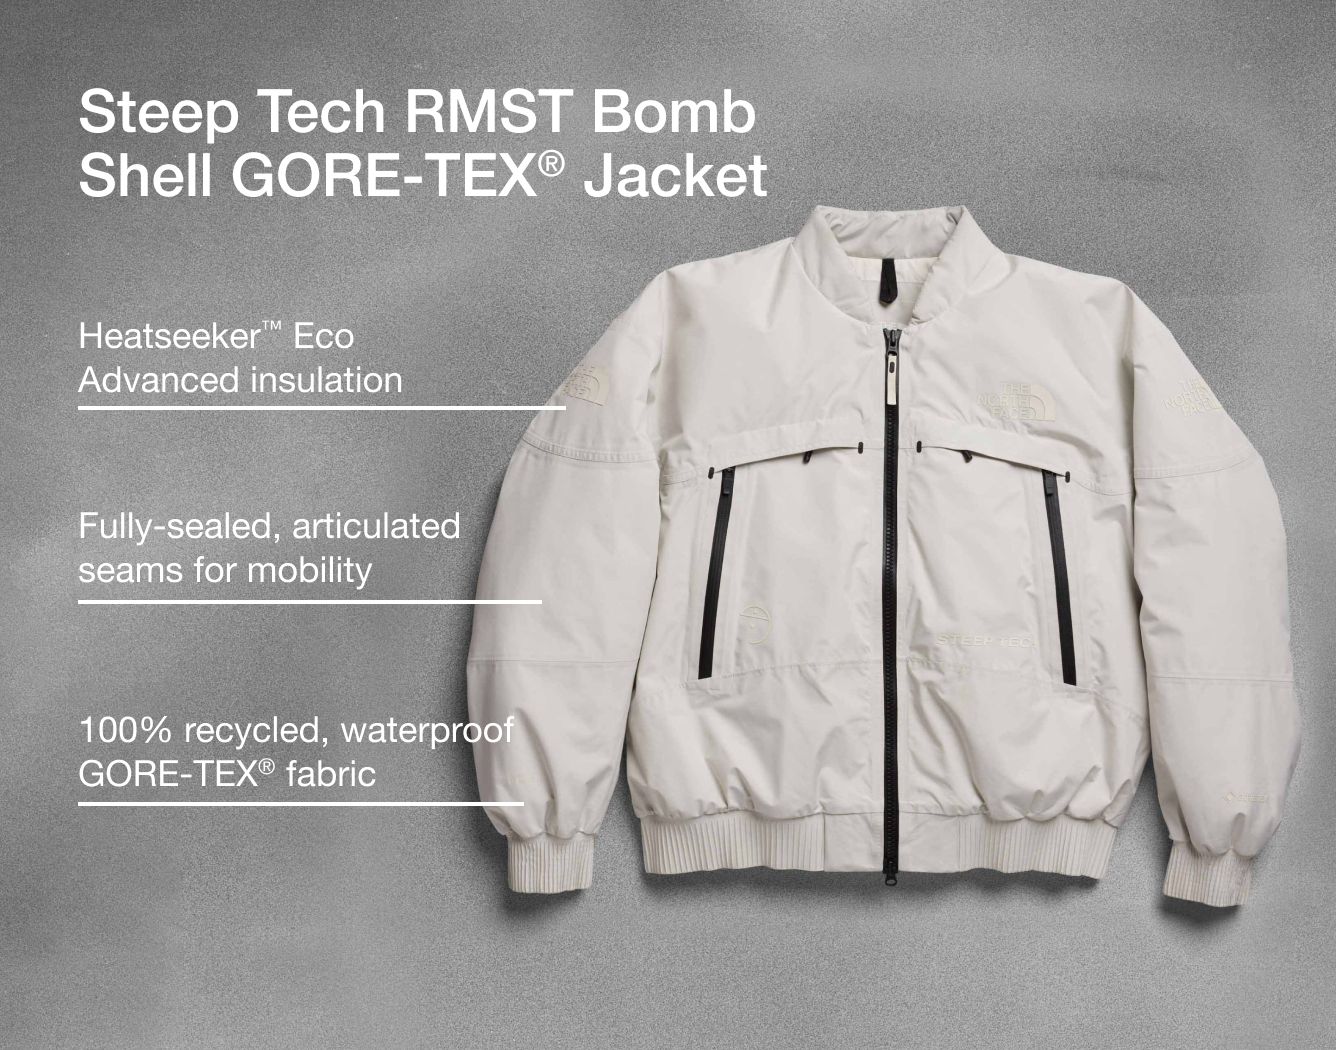 Studio shot of the Steep Tech RMST Bomb Shell with text overlay pointing out fabrication and insulation.